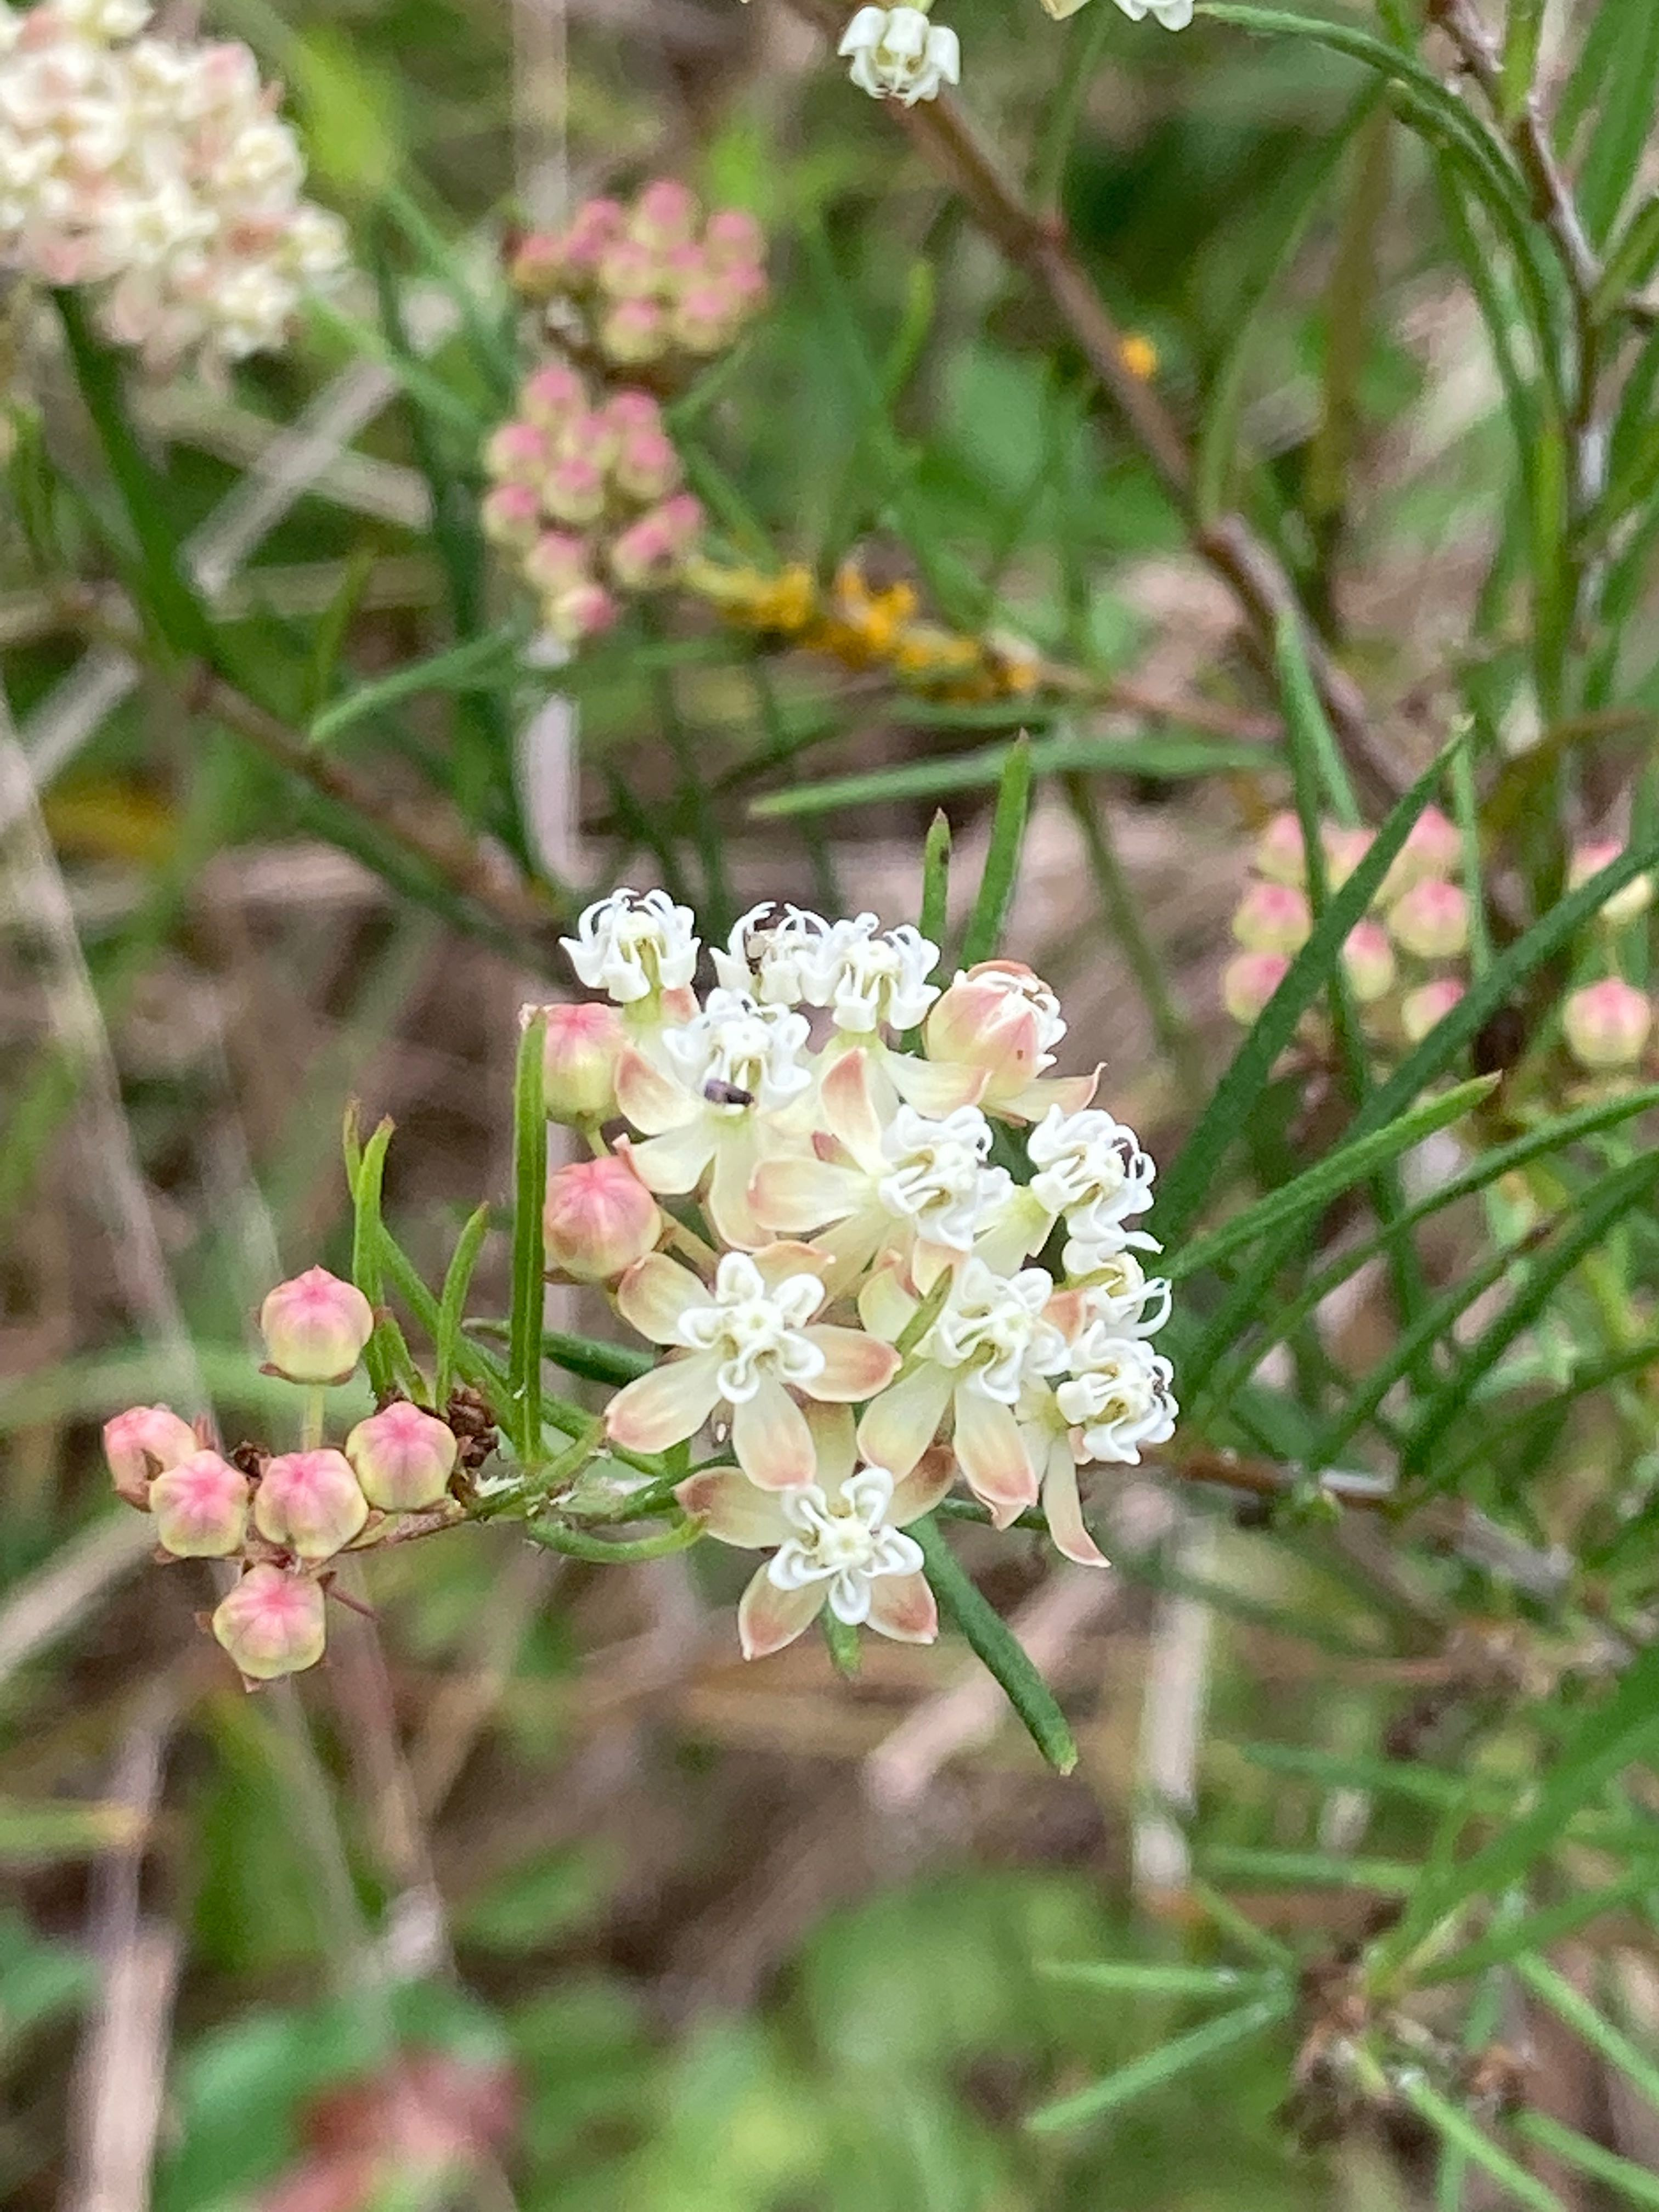 The Scientific Name is Asclepias verticillata. You will likely hear them called Whorled Milkweed. This picture shows the The flowers have a delicate beauty close-up. of Asclepias verticillata